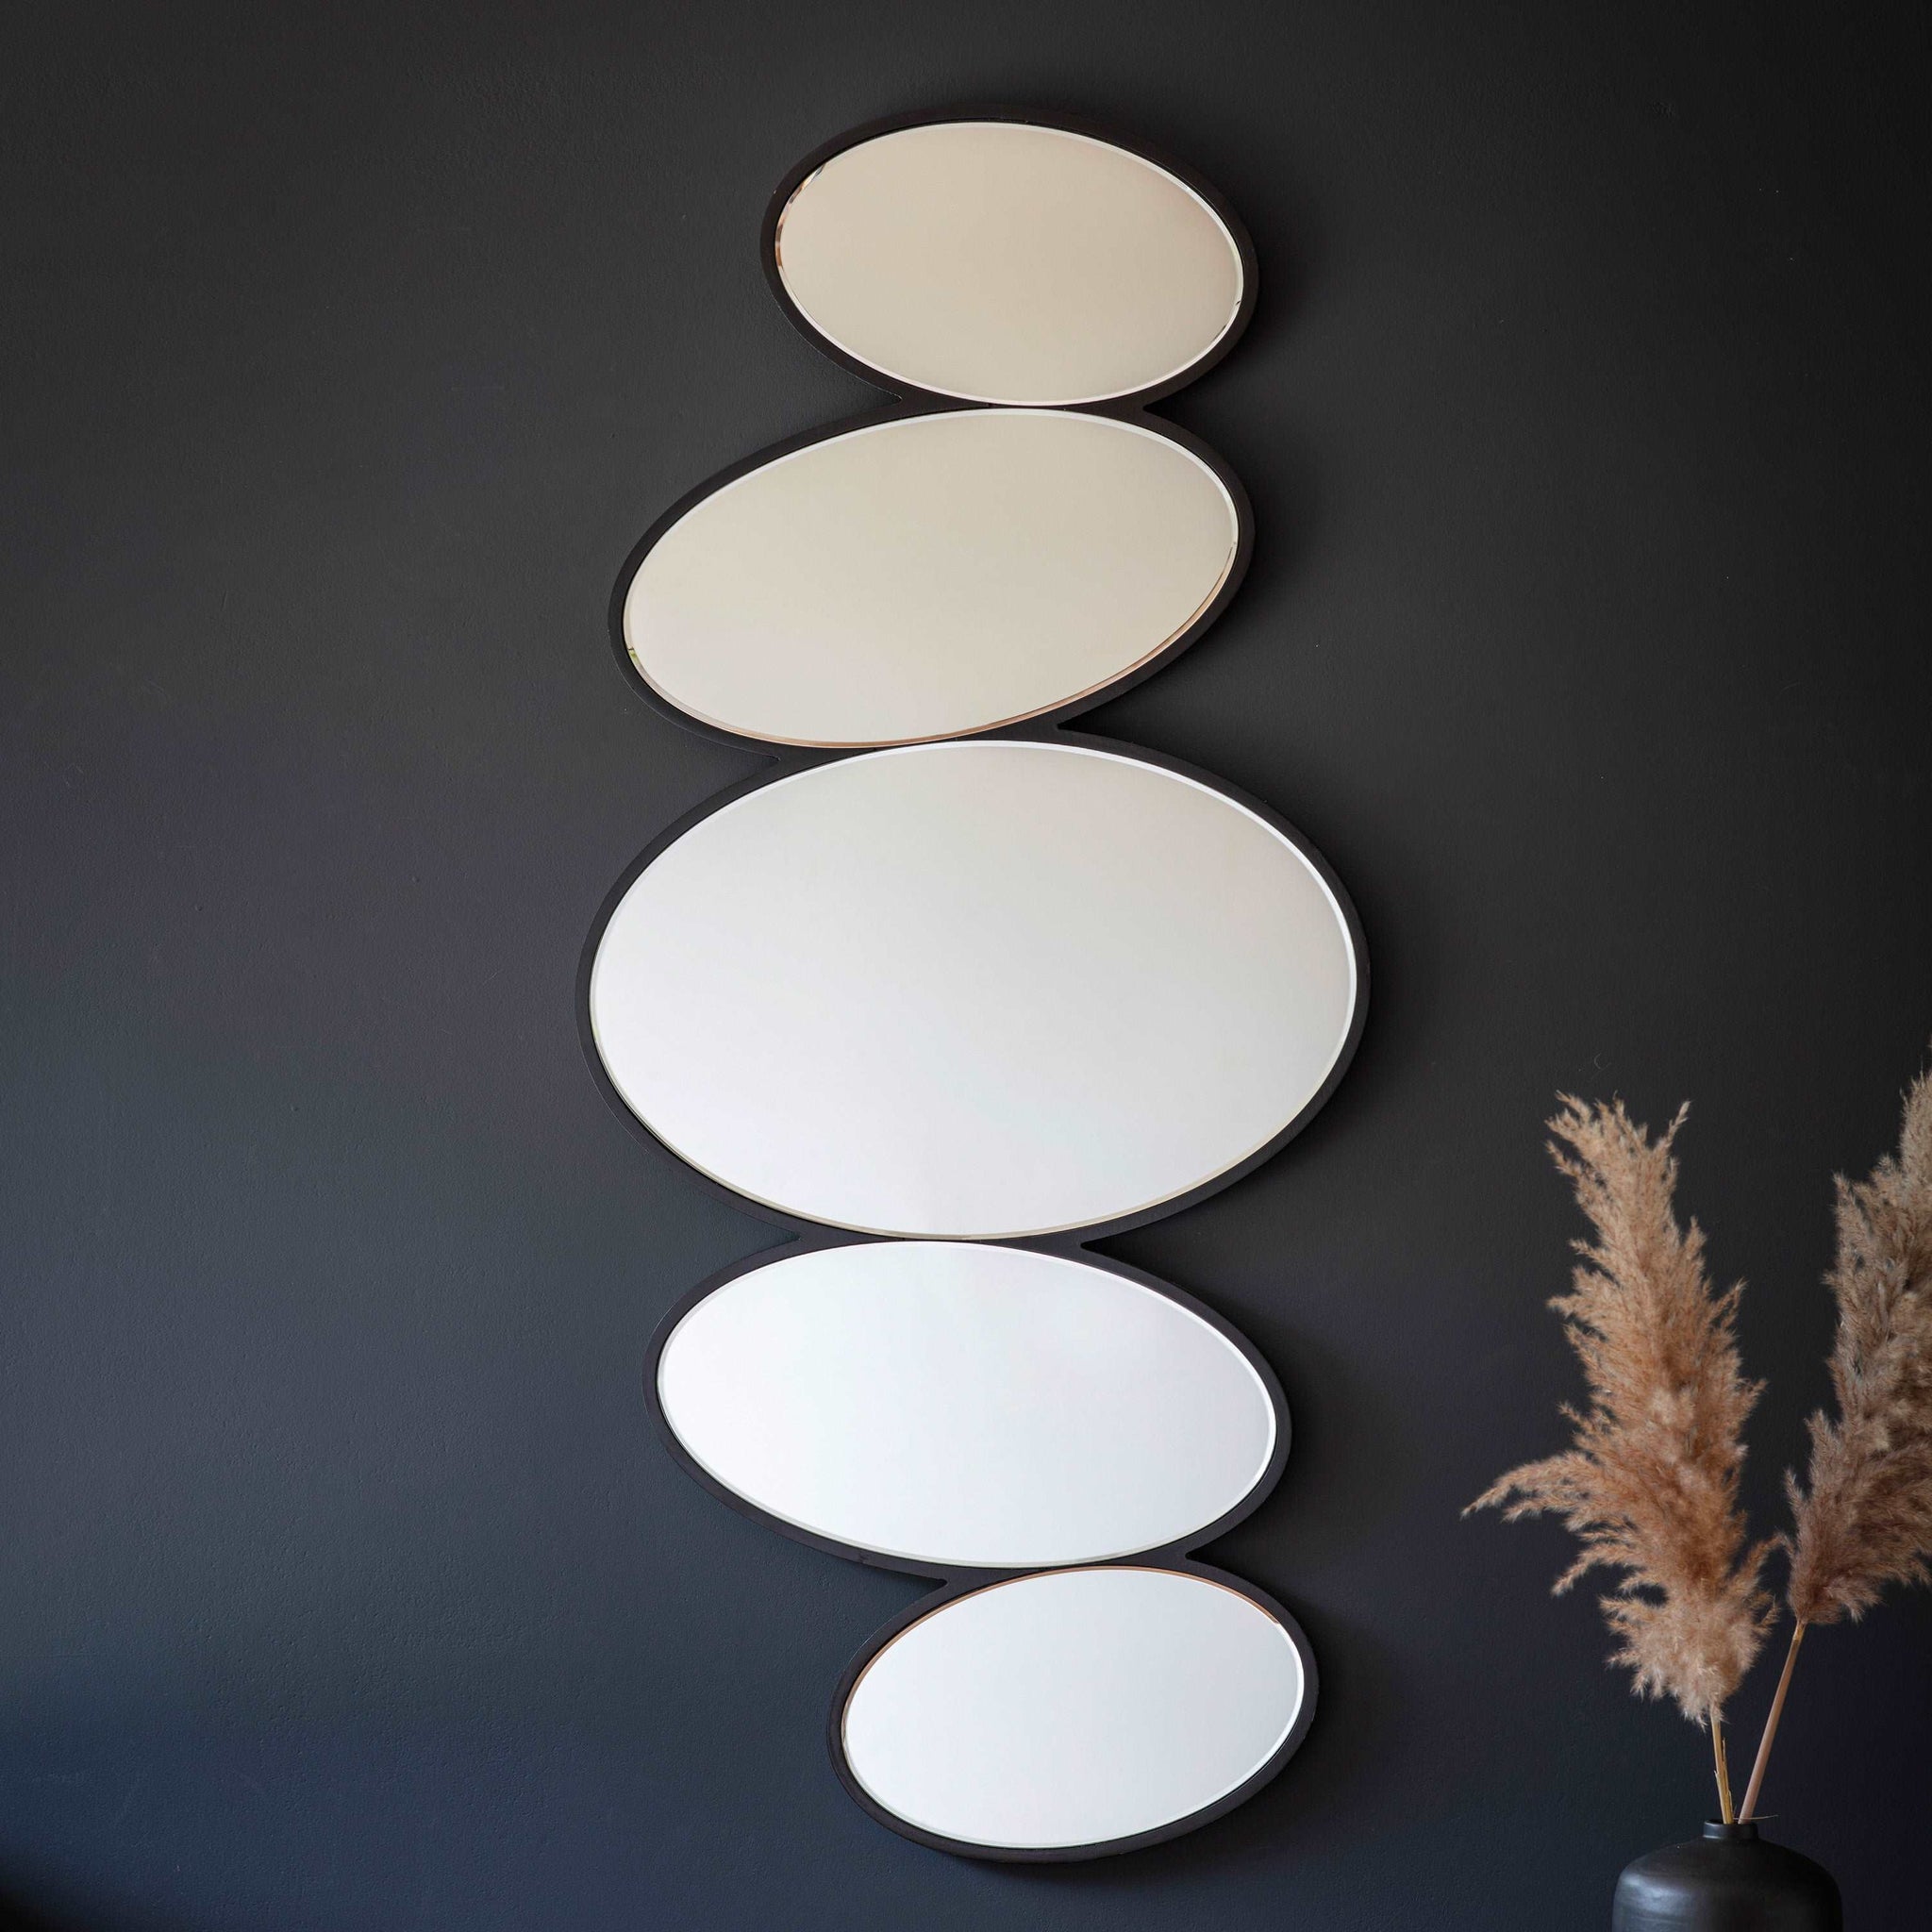 Aders Pebble Stack Mirror